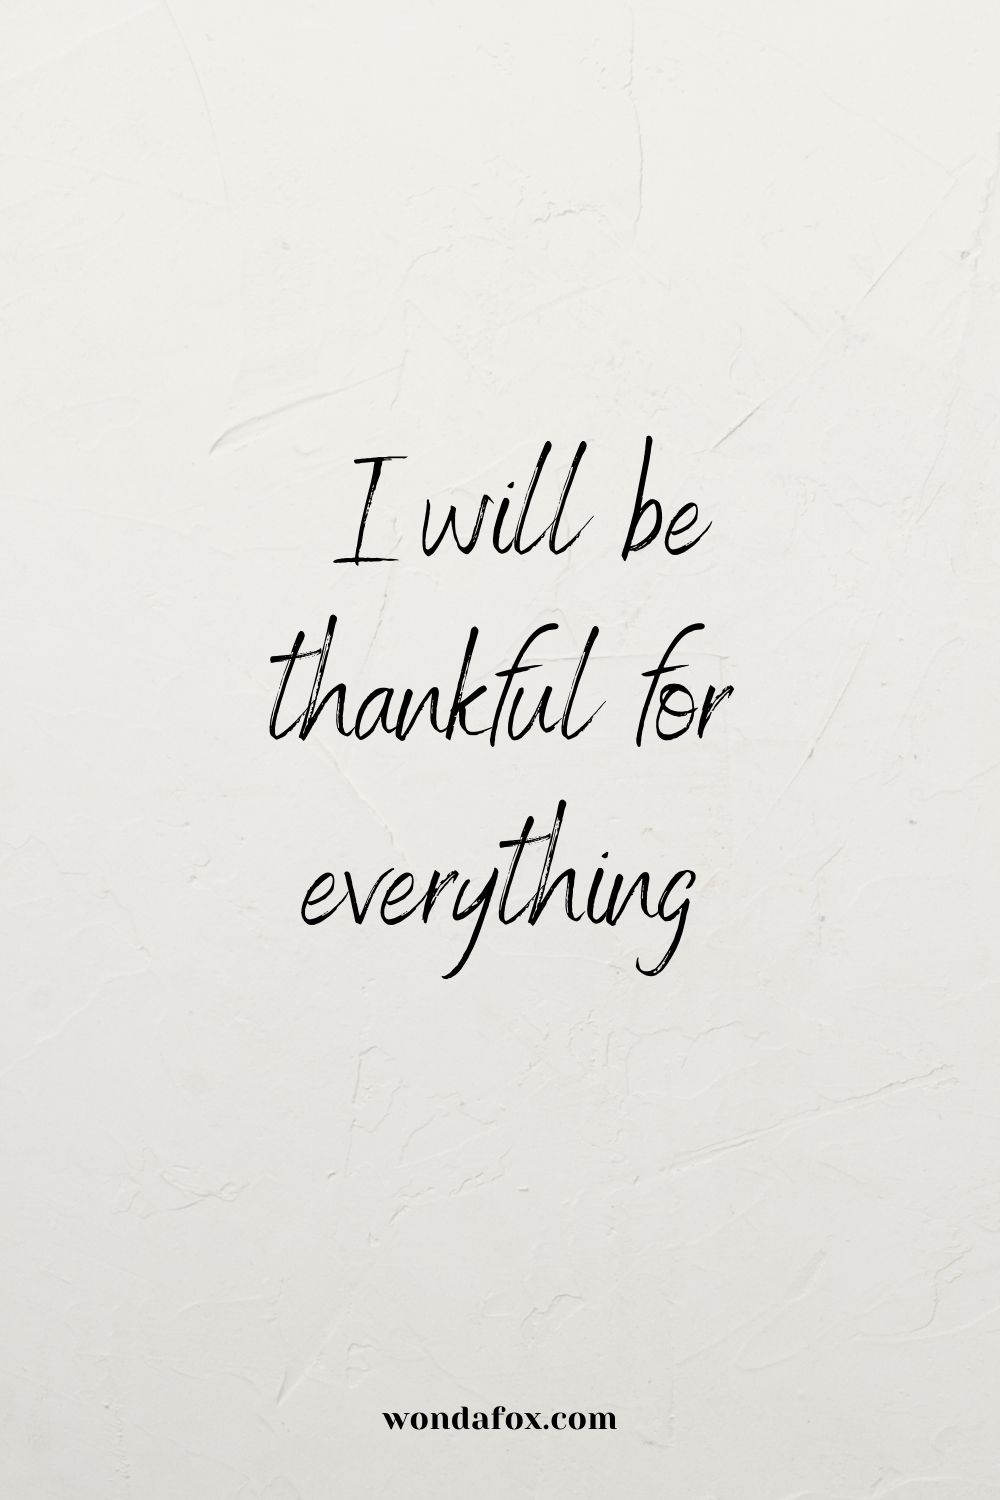  I will be thankful for everything